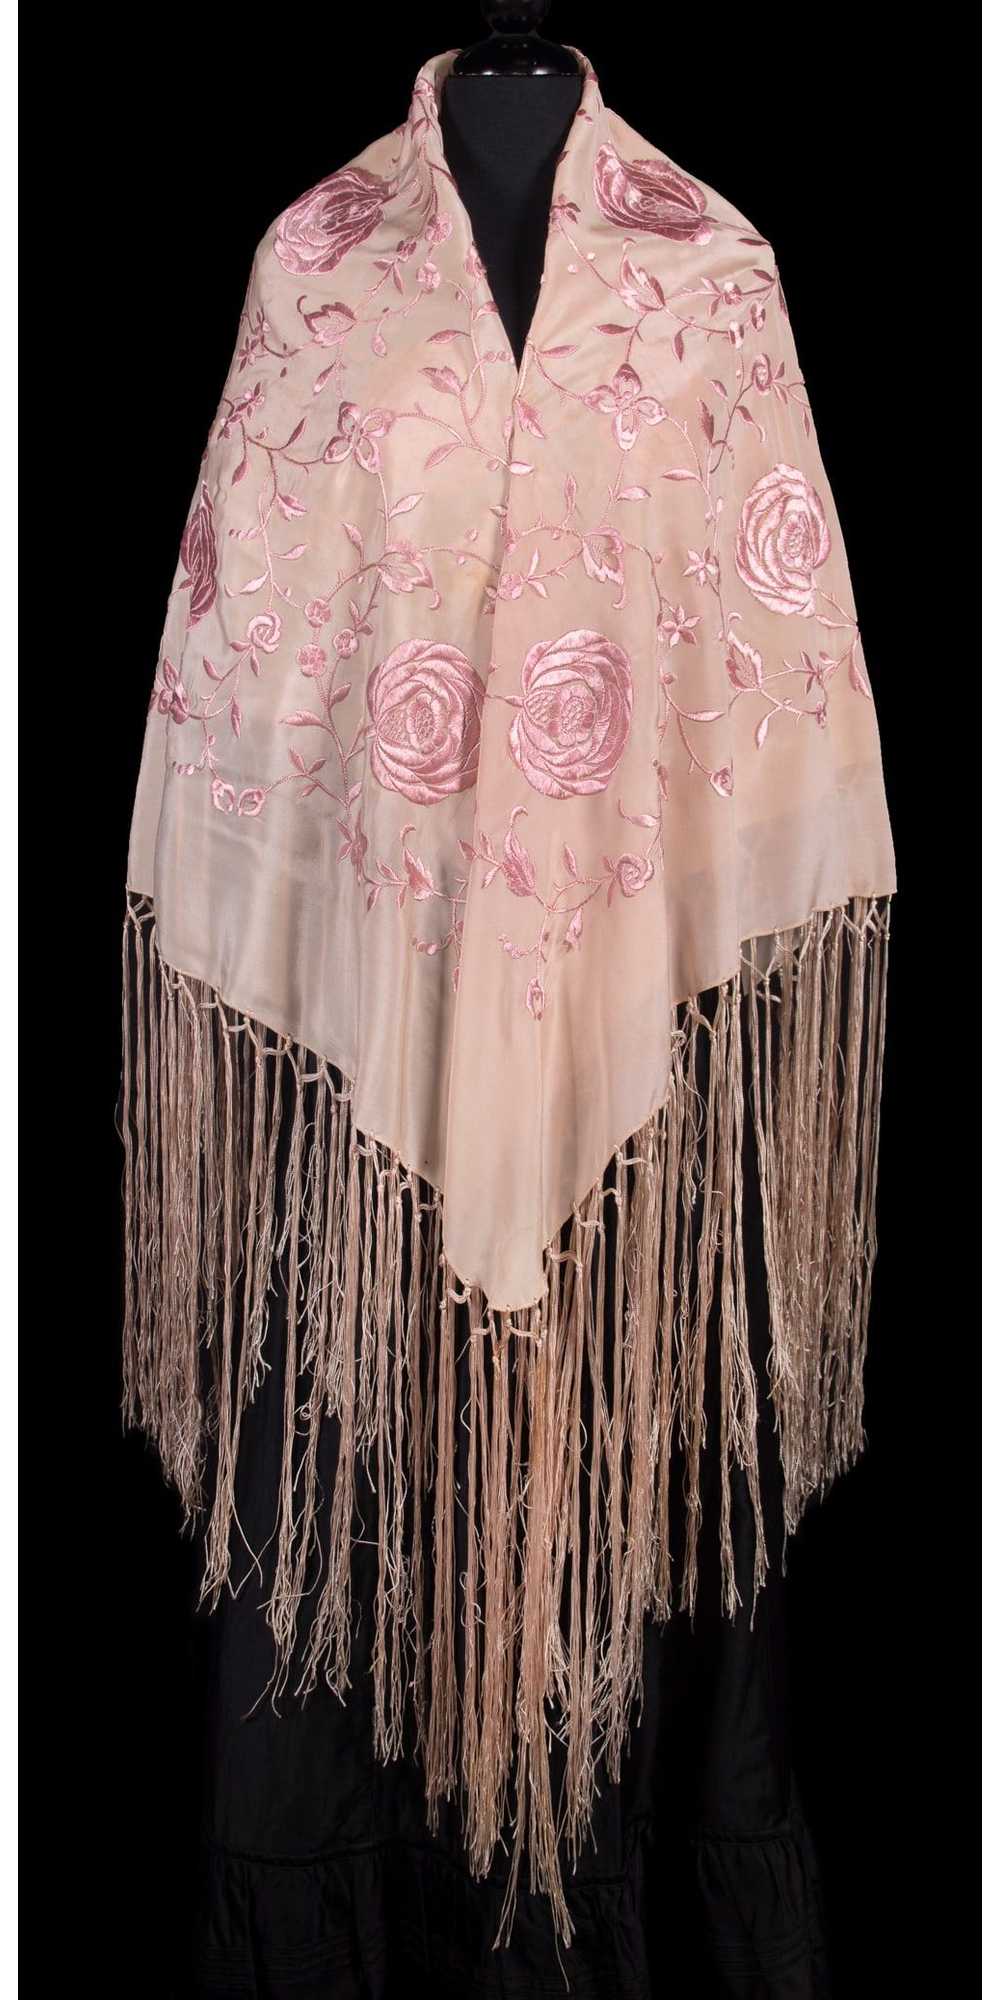 TWO CANTON SHAWLS, 1930s - image 2